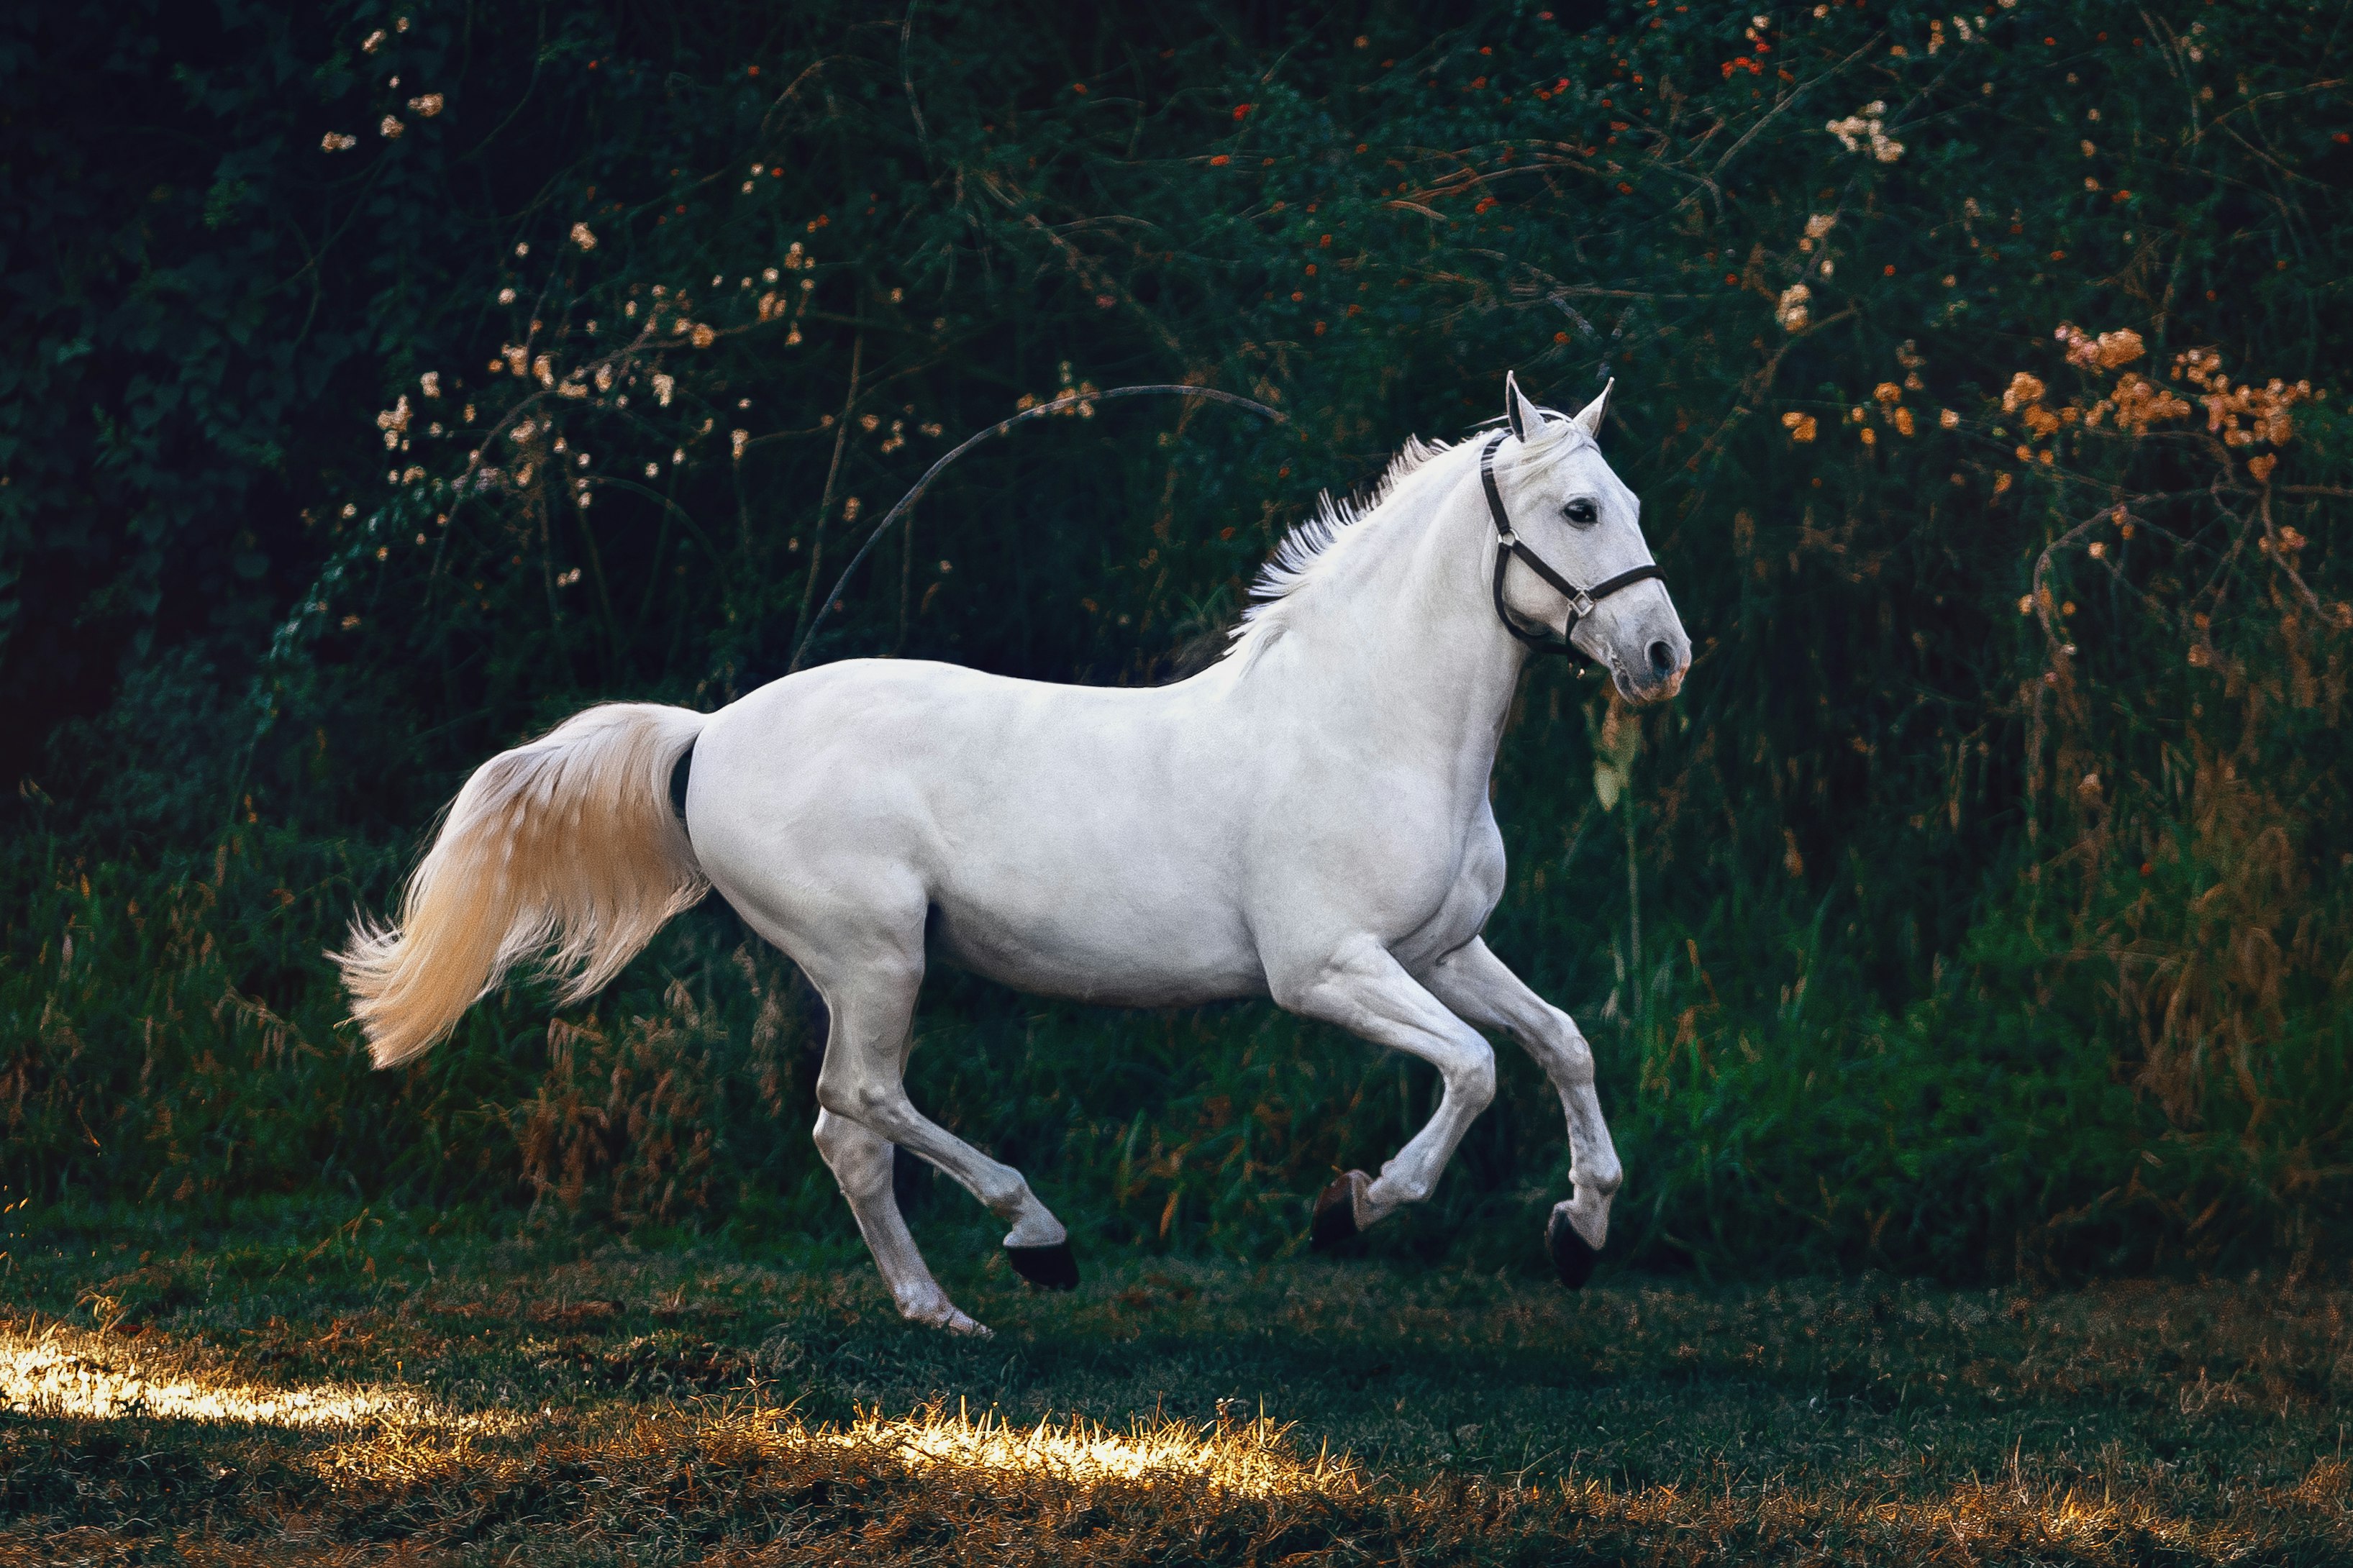 A white horse photo from Helena Lopes